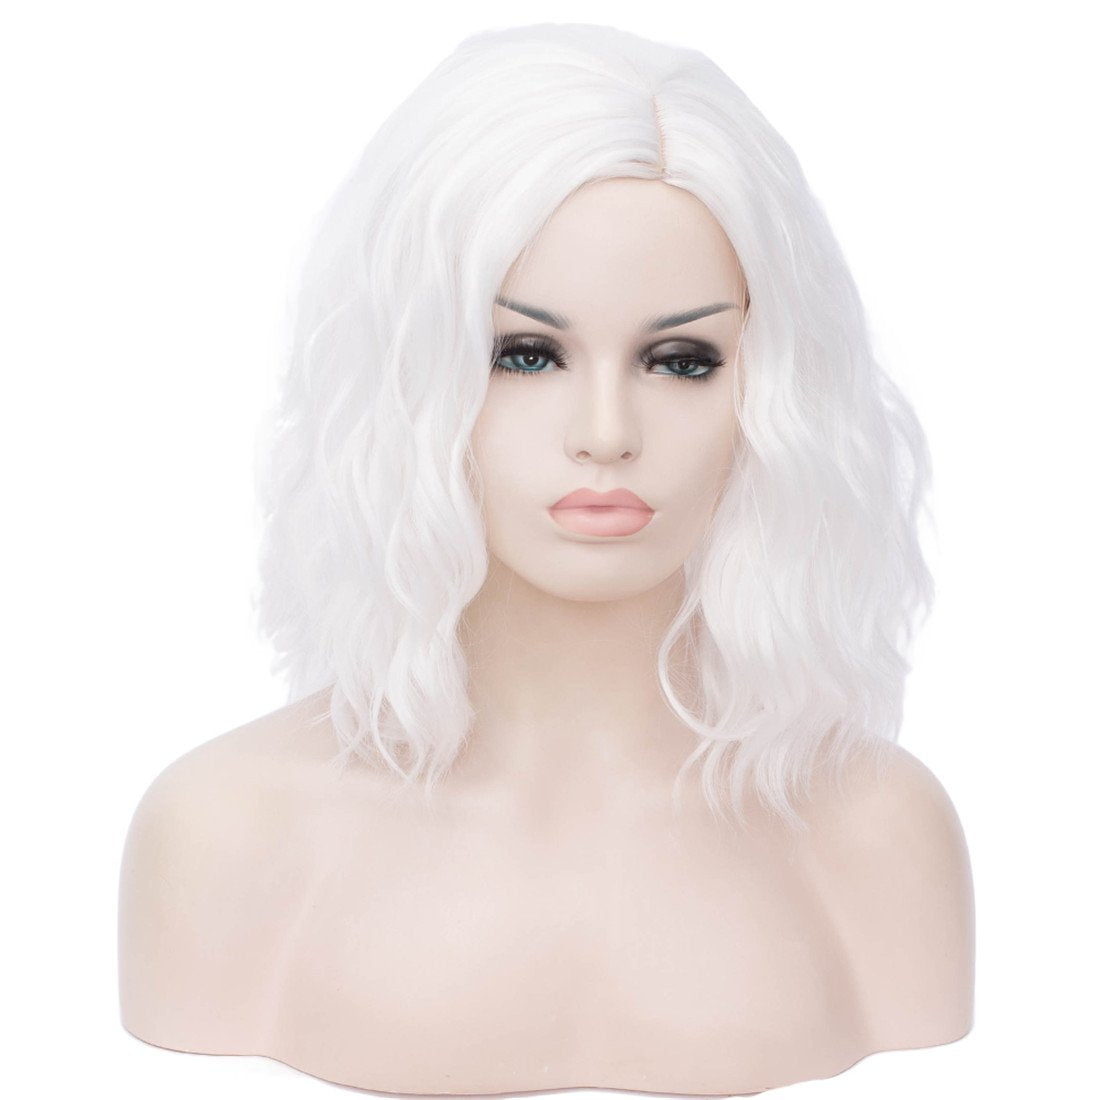 white wig snow white short wig HAIR Synthetic Curly Bob Wig with Bangs Short Bob Wavy Hair Wigs Wine Red Color Wigs for Women Bob Style Synthetic Heat Resistant Bob Wigs.